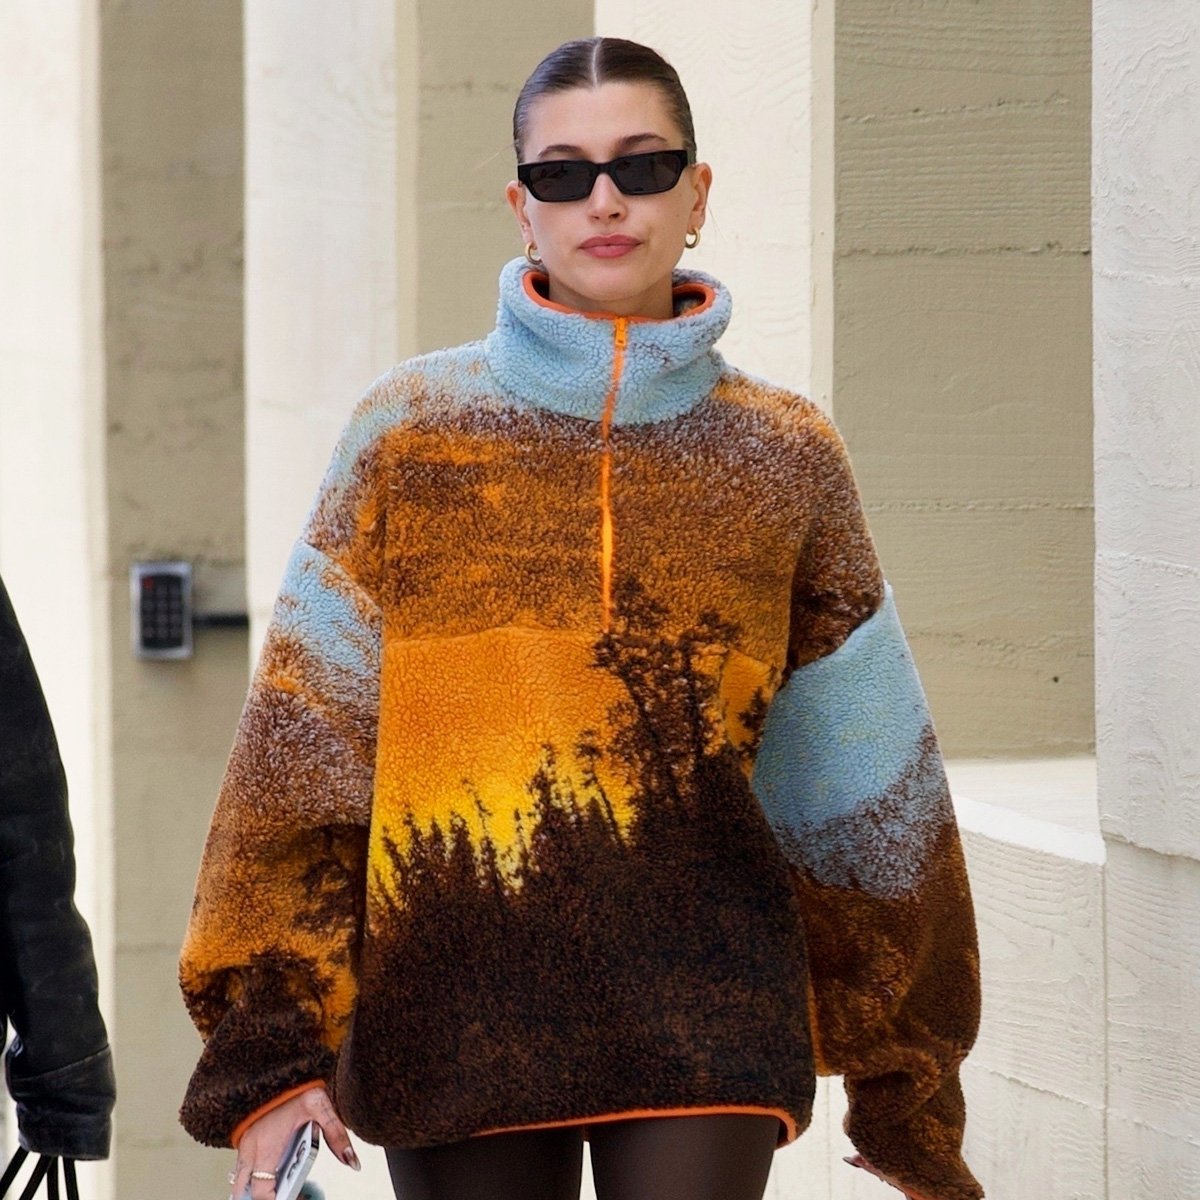 Hailey Bieber Stays Cozy in a Patterned Fleece During a Day Out in